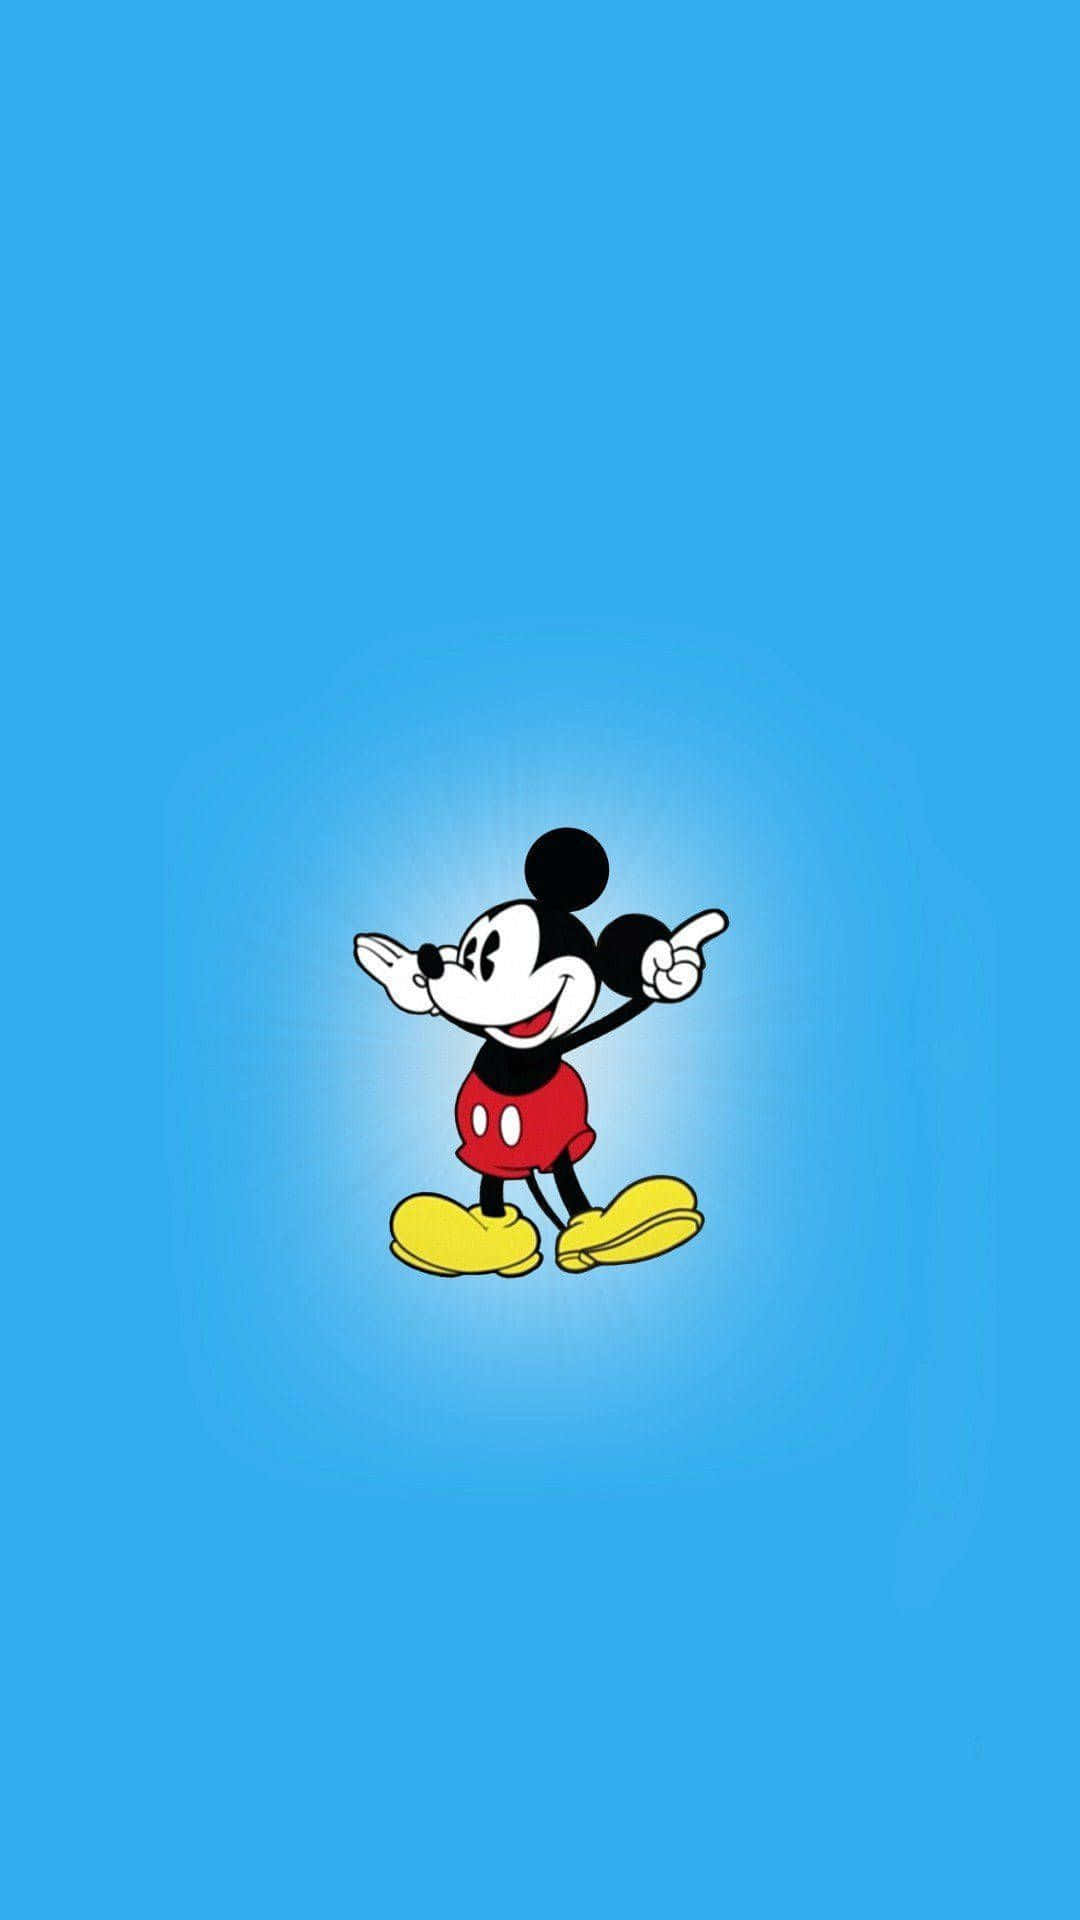 Come Home to The Mouse - Mickey Mouse Home Wallpaper